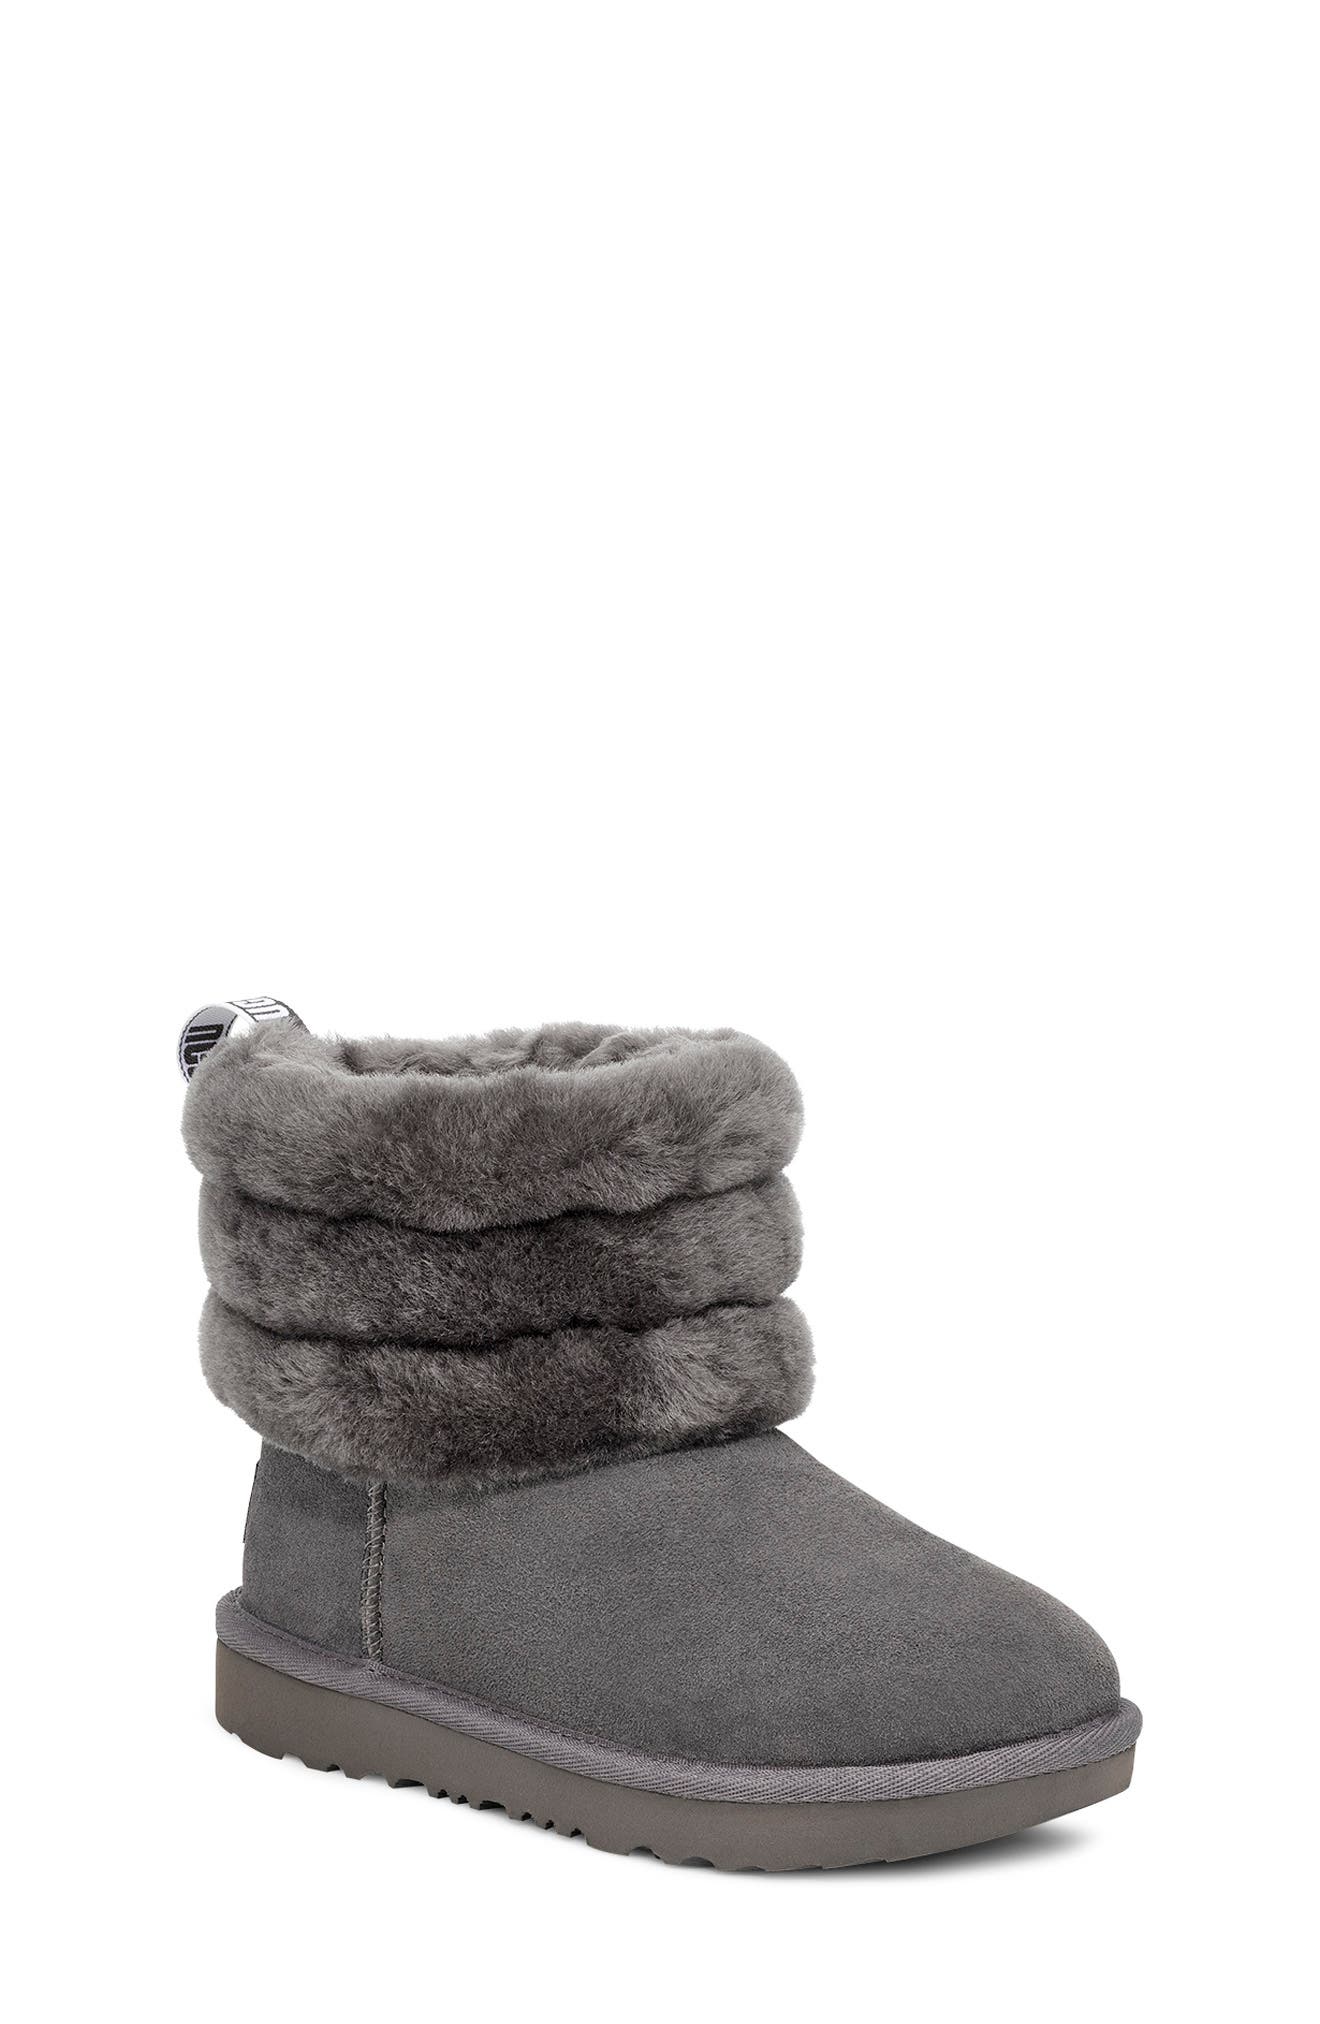 ugg black fluff mini quilted boots